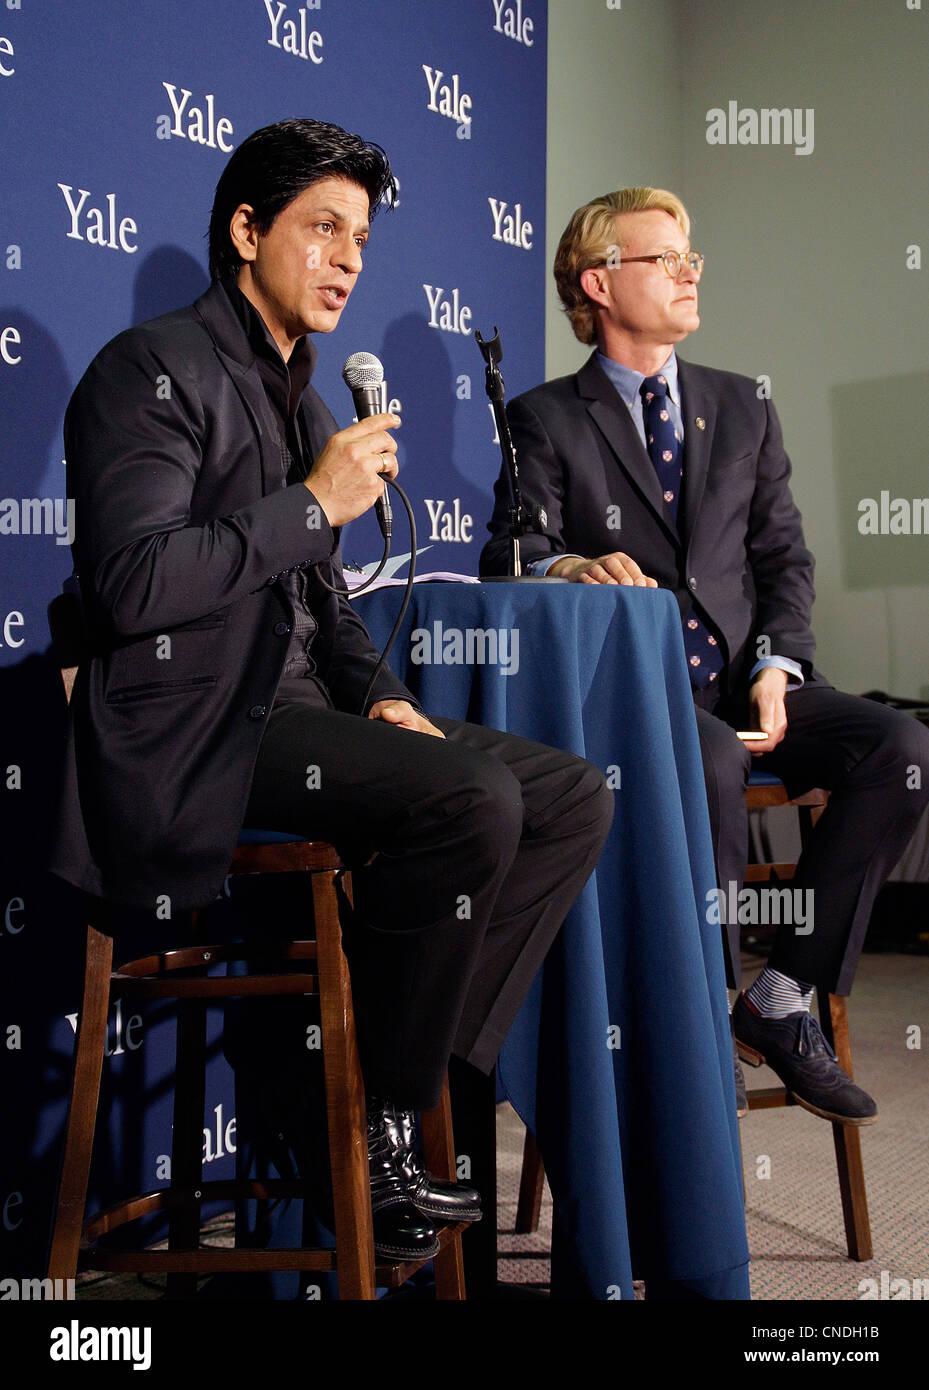 New Haven, CT USA-- Bollywood film superstar Shah Rukh Khan, left, along with Michael Morand of Yale, answers questions from the media during a press conference as he prepared to greet a packed house of fans at the Shubert Theater in New Haven. Shah Rukh Khan was receiving the Chubb Fellowship from Yale University. Stock Photo